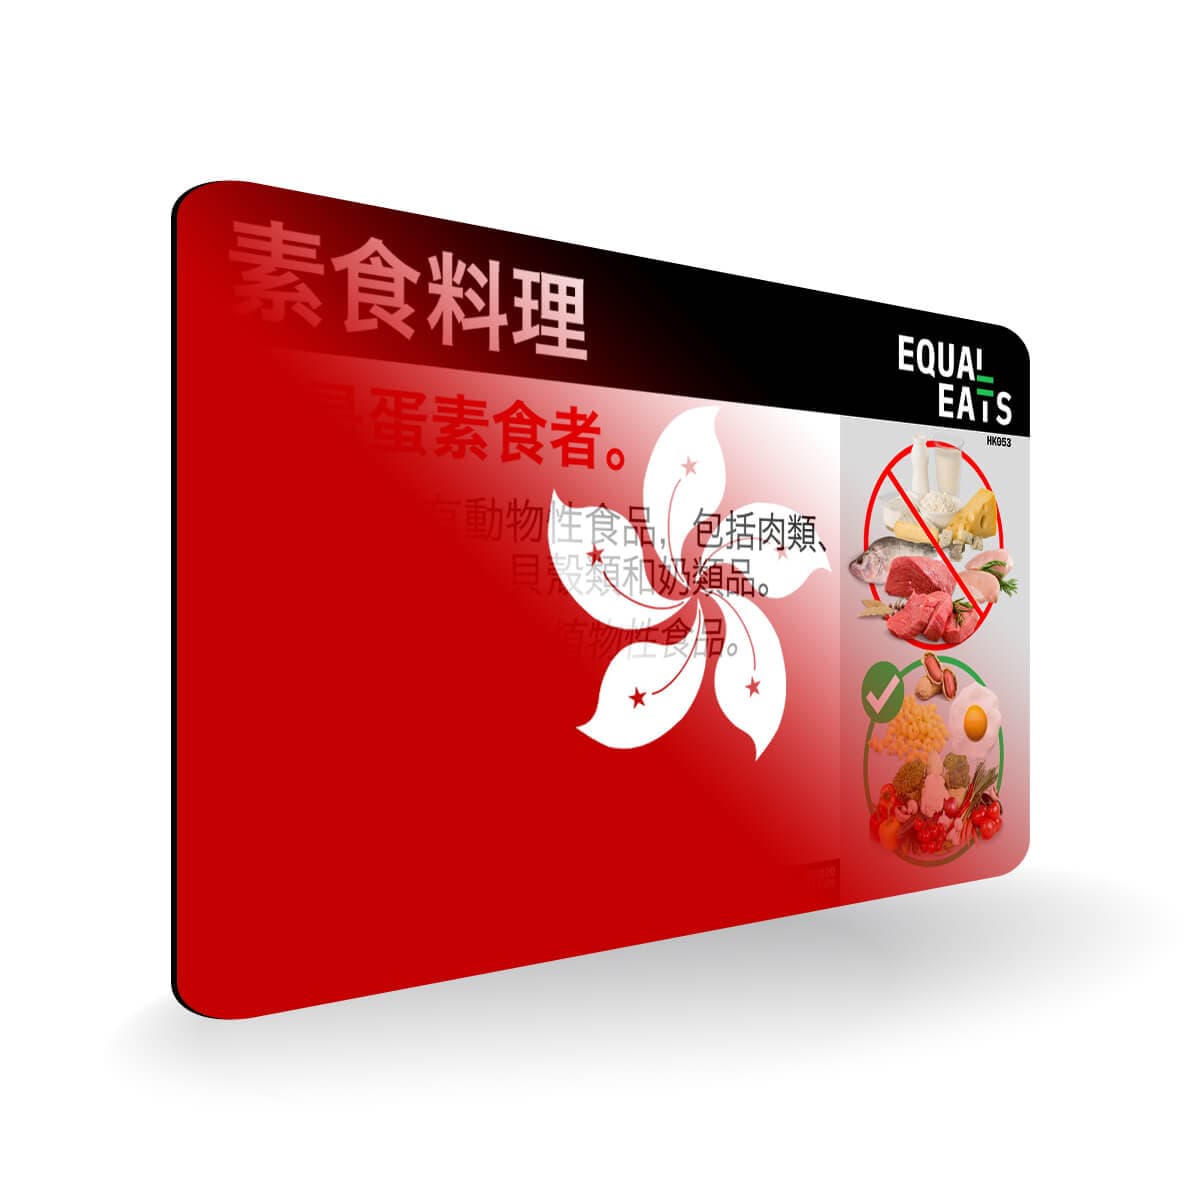 Ovo Vegetarian in Traditional Chinese. Card for Vegetarian in Hong Kong